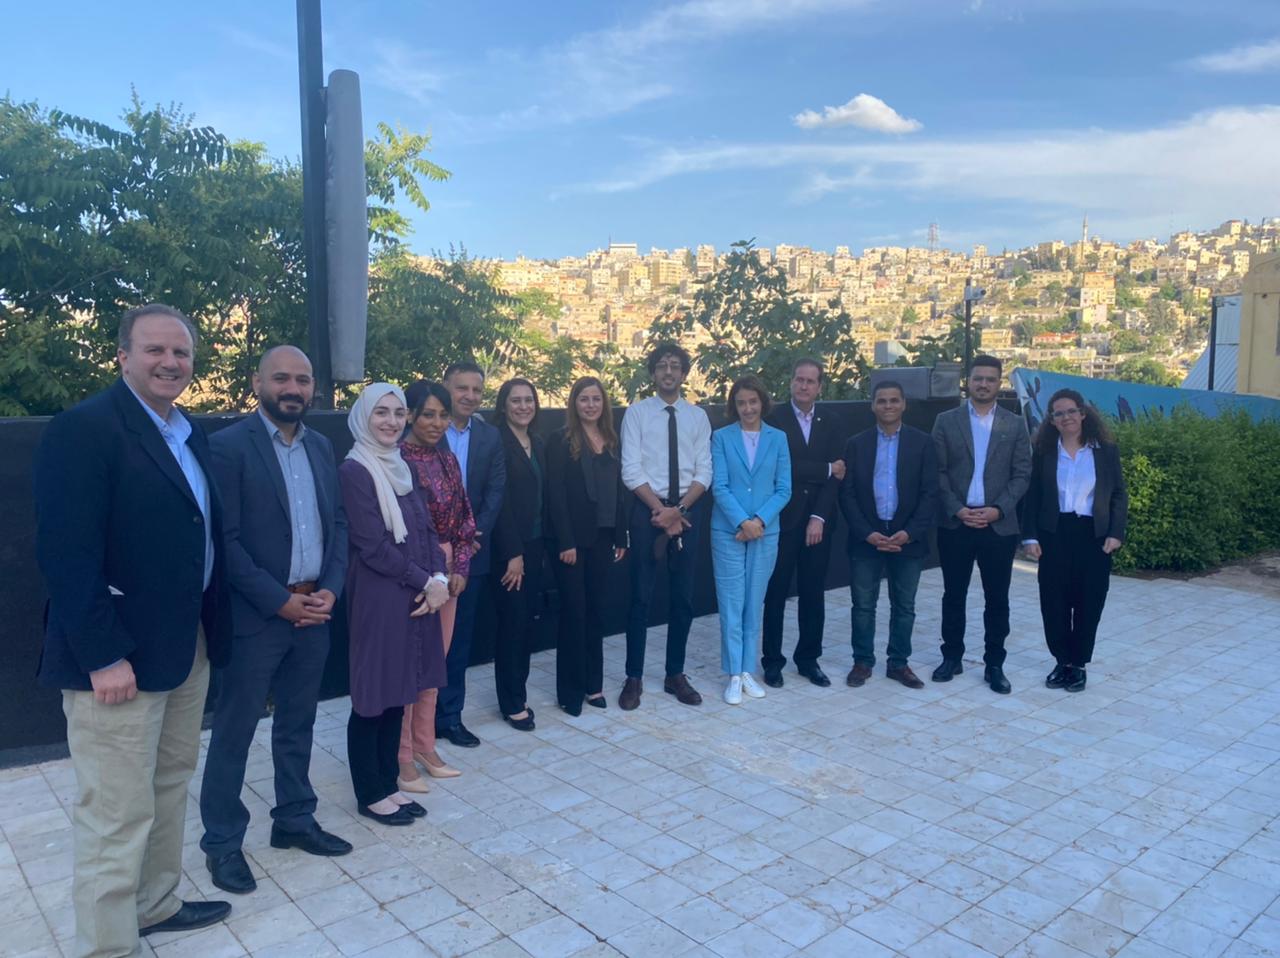 Meeting of Anna Lindh Foundation Management with the Jordanian Network of the ALF